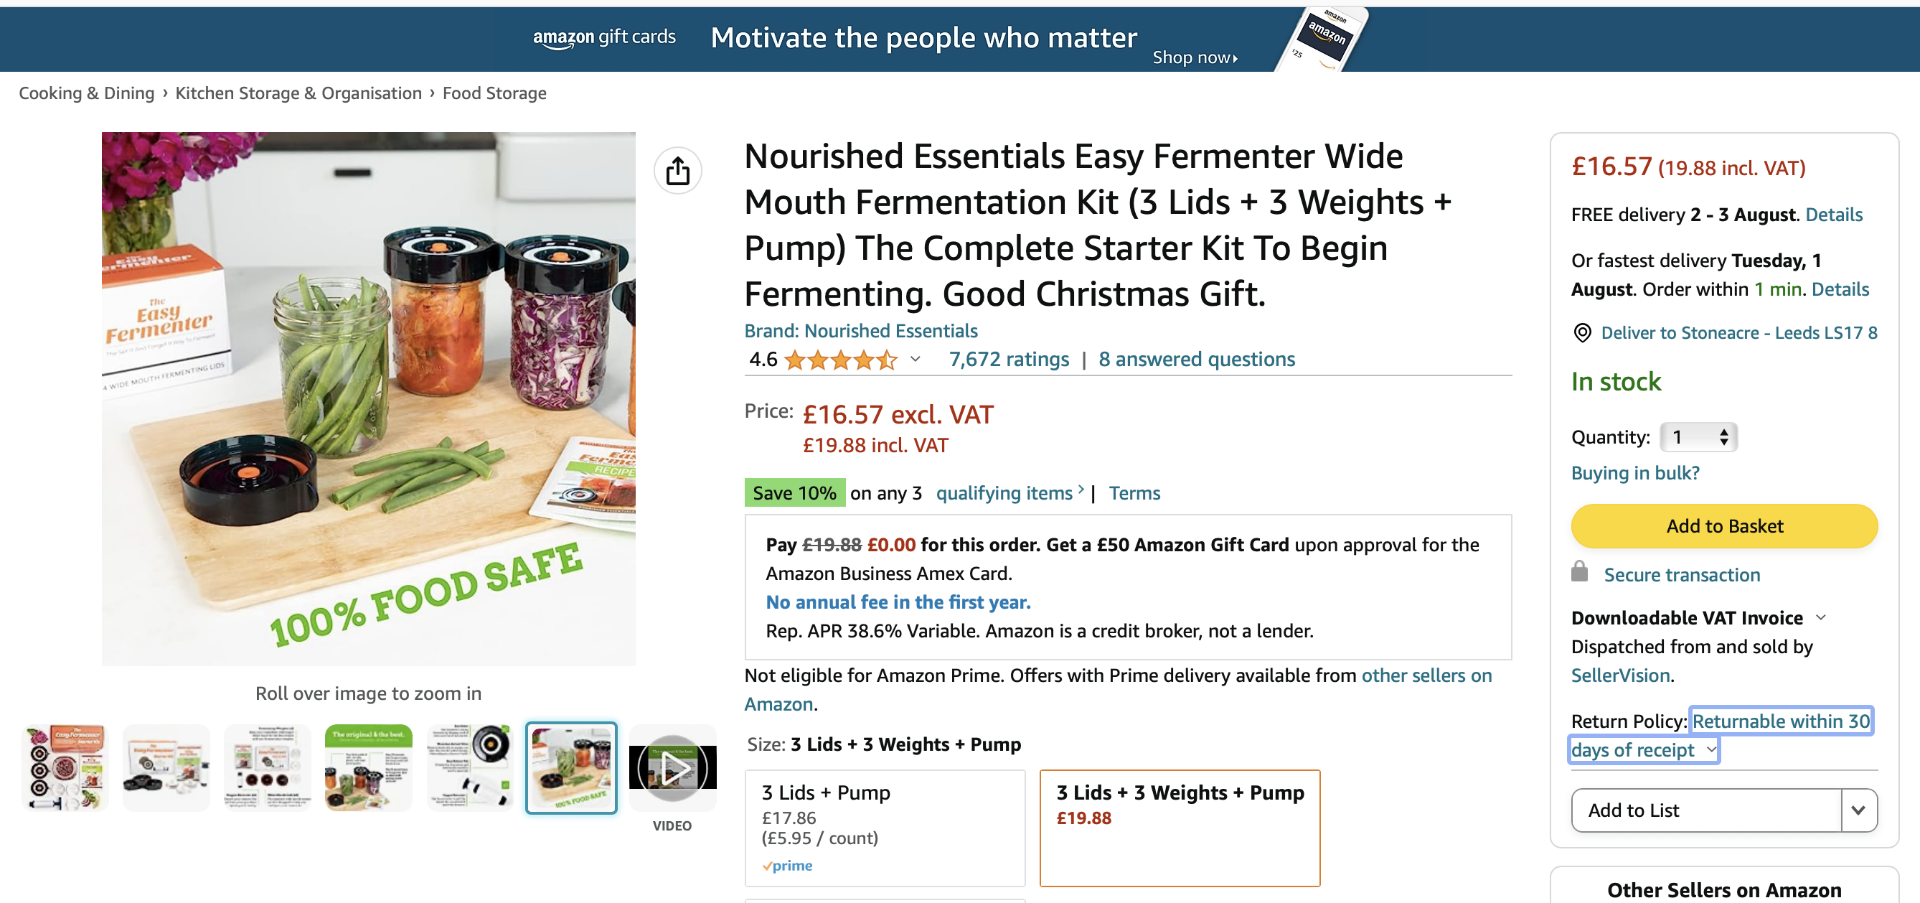 5 x Nourished Essentials Easy Fermenter Wide Mouth Fermentation Kit & Accessories - RRP £90.90 ! - Image 2 of 5